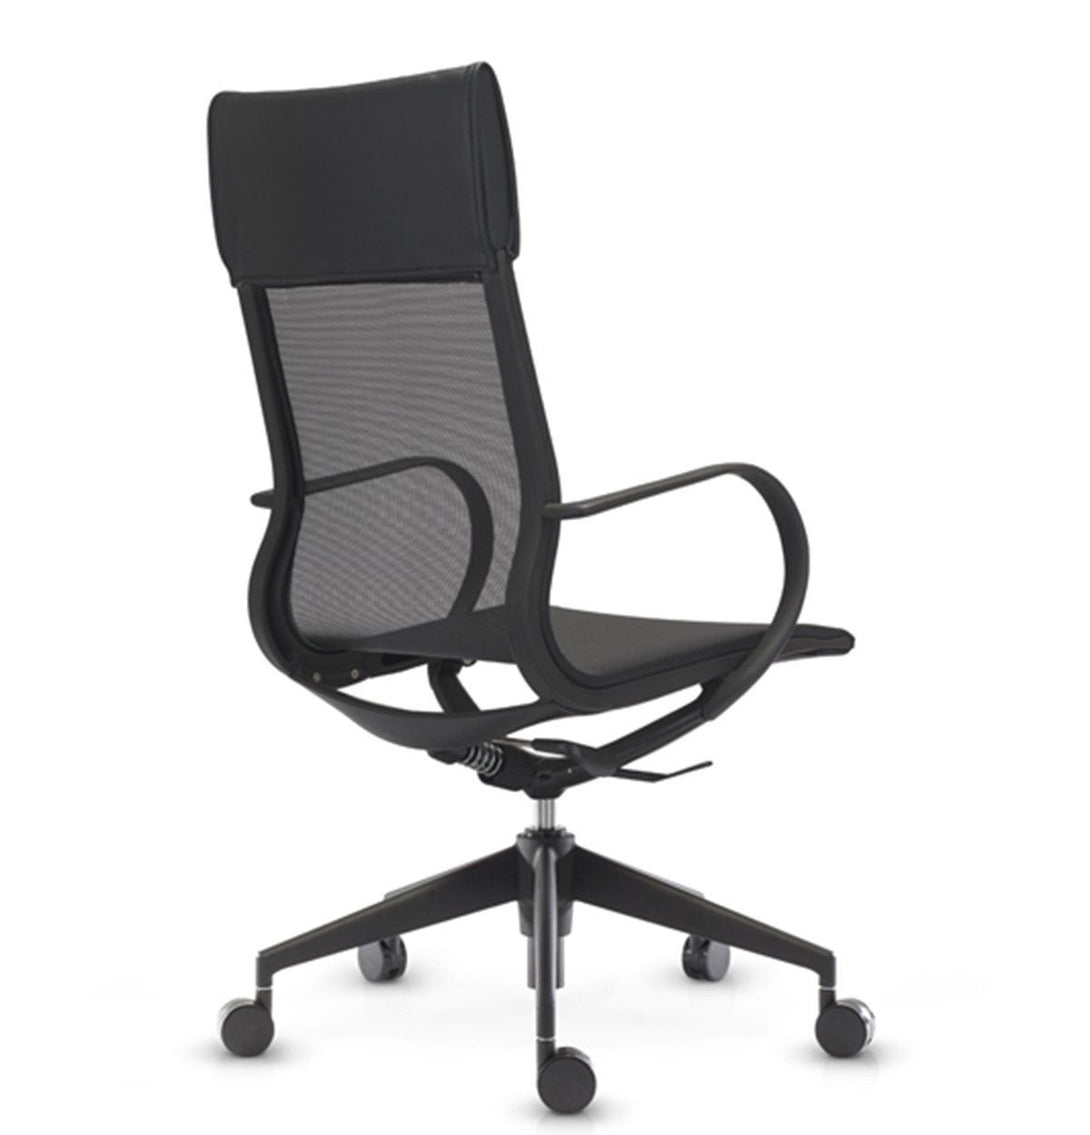 Mercury Wing High Back Office Chair Z-furnishing